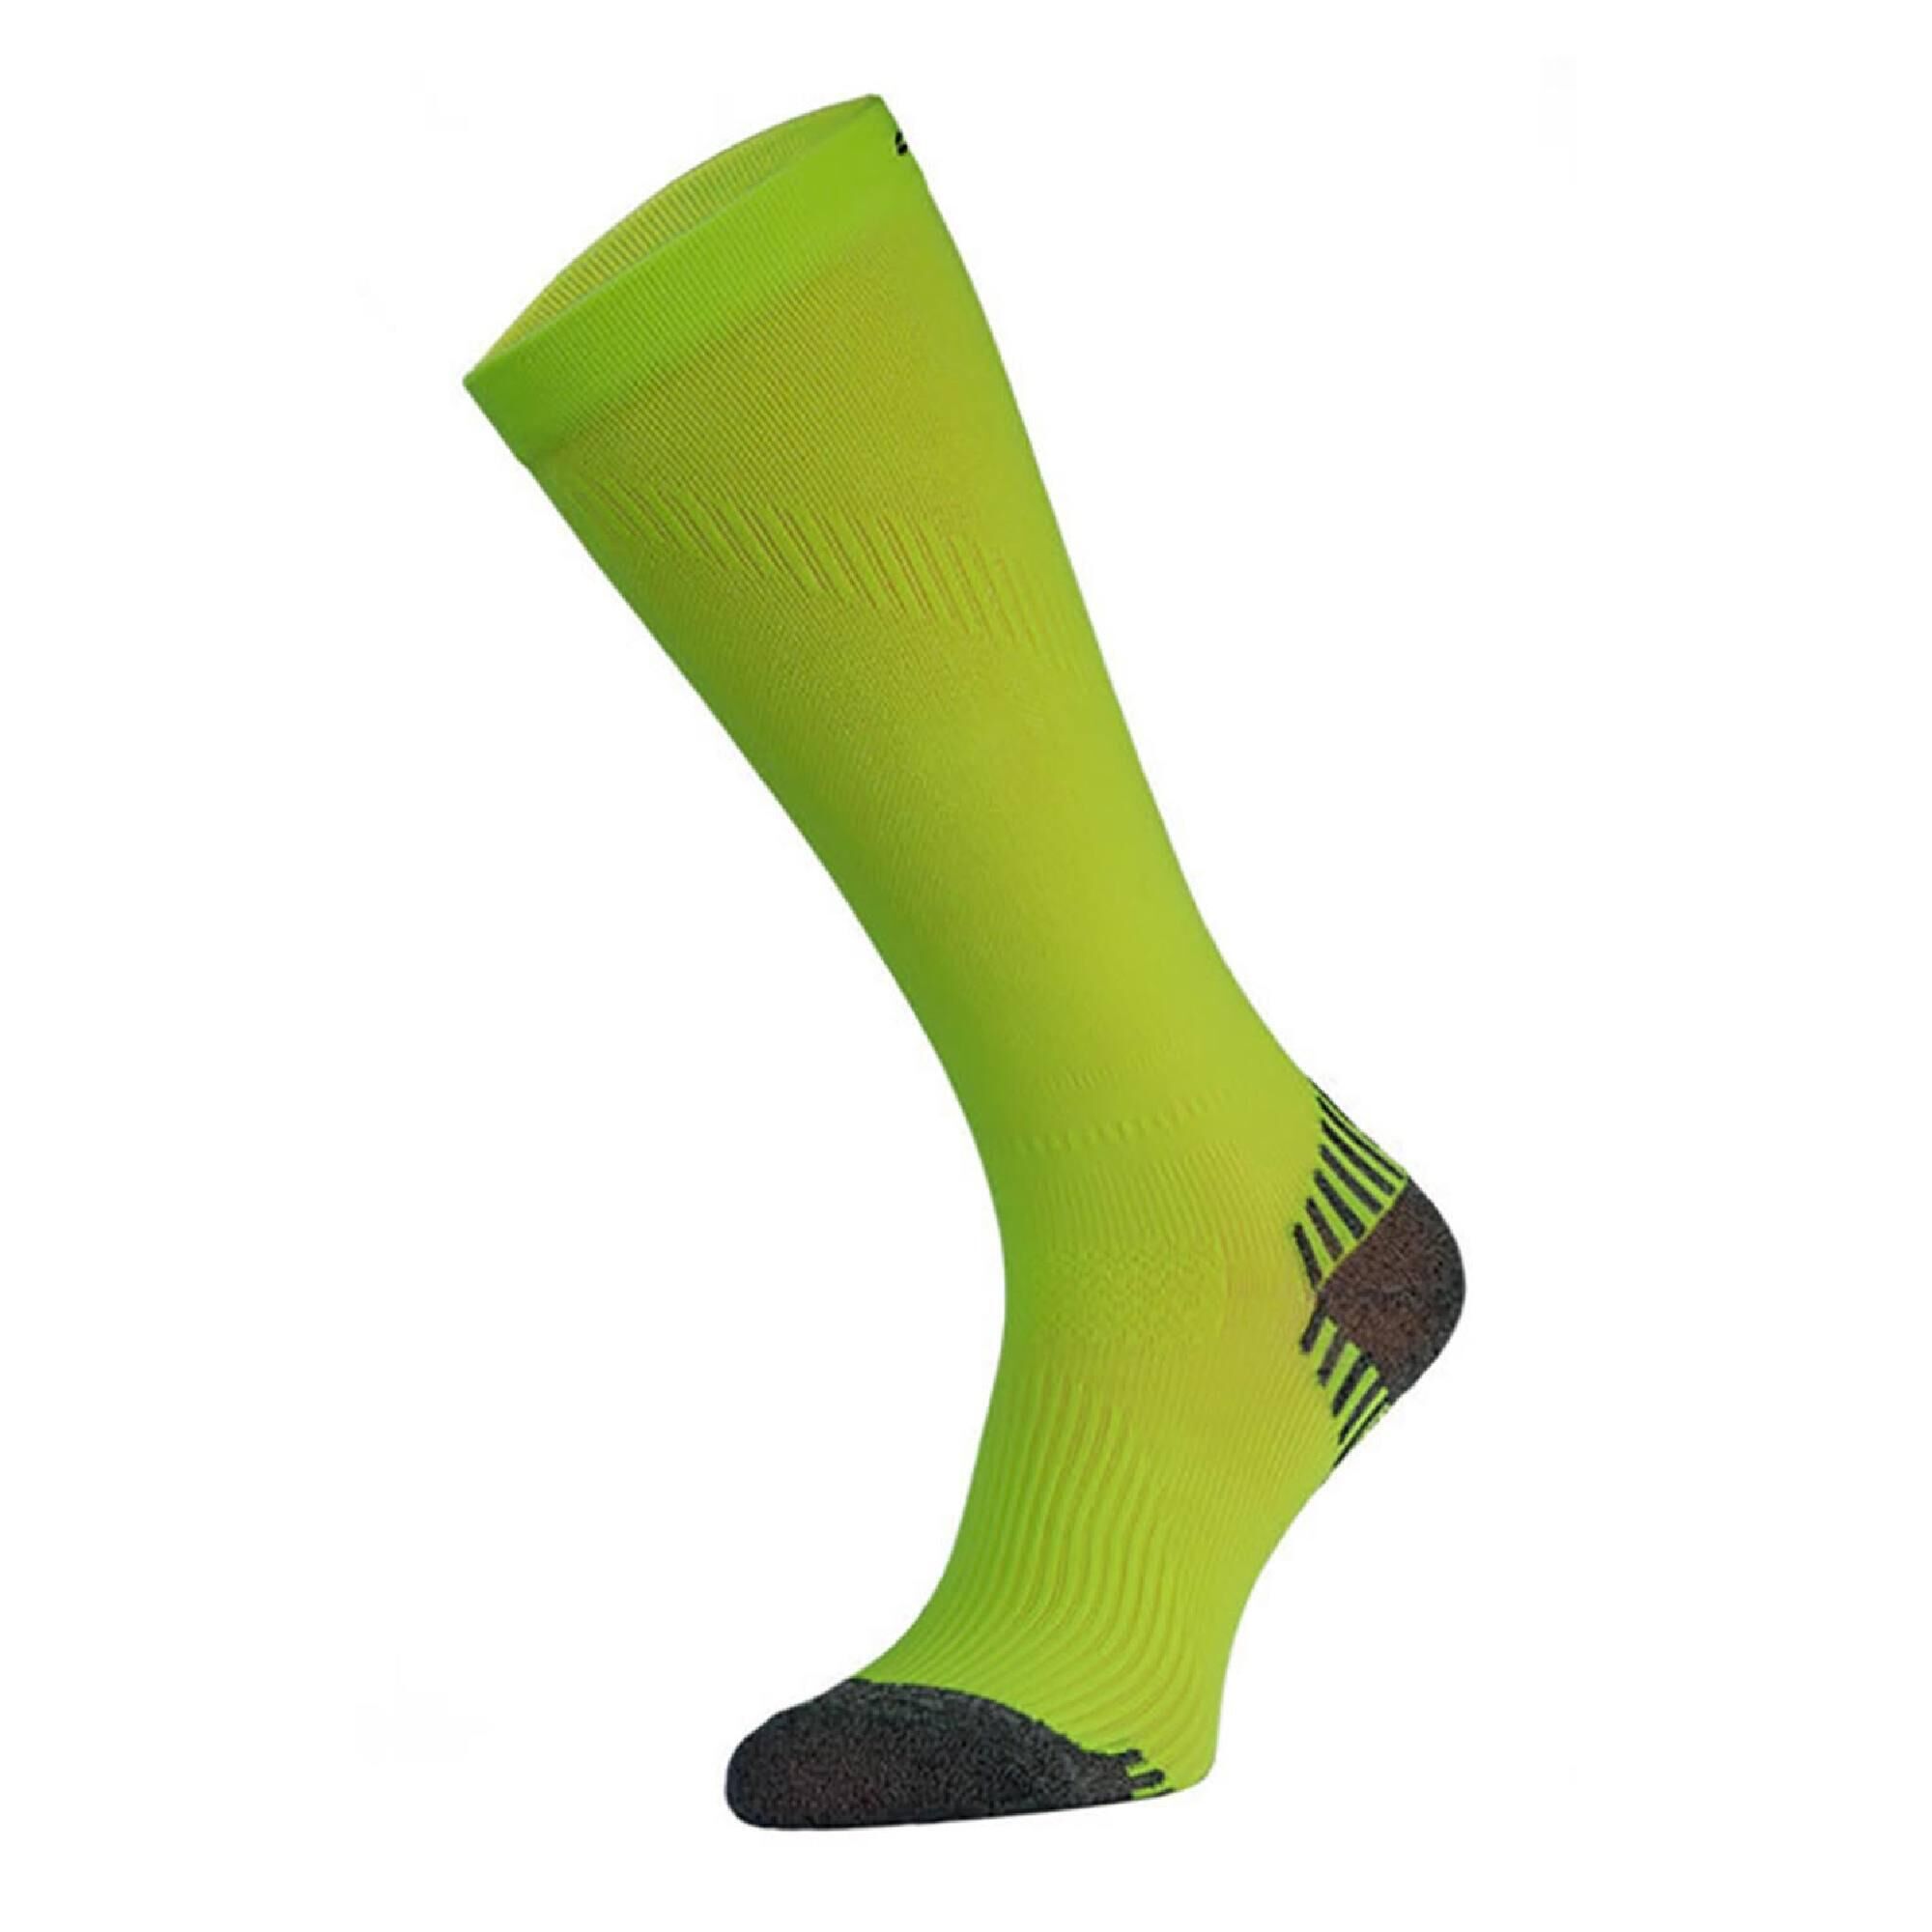 Dimok Calf Compression Sleeves Green Leg Compression Socks For Calves  Running Knee Support - Buy Dimok Calf Compression Sleeves Green Leg  Compression Socks For Calves Running Knee Support Online at Best Prices